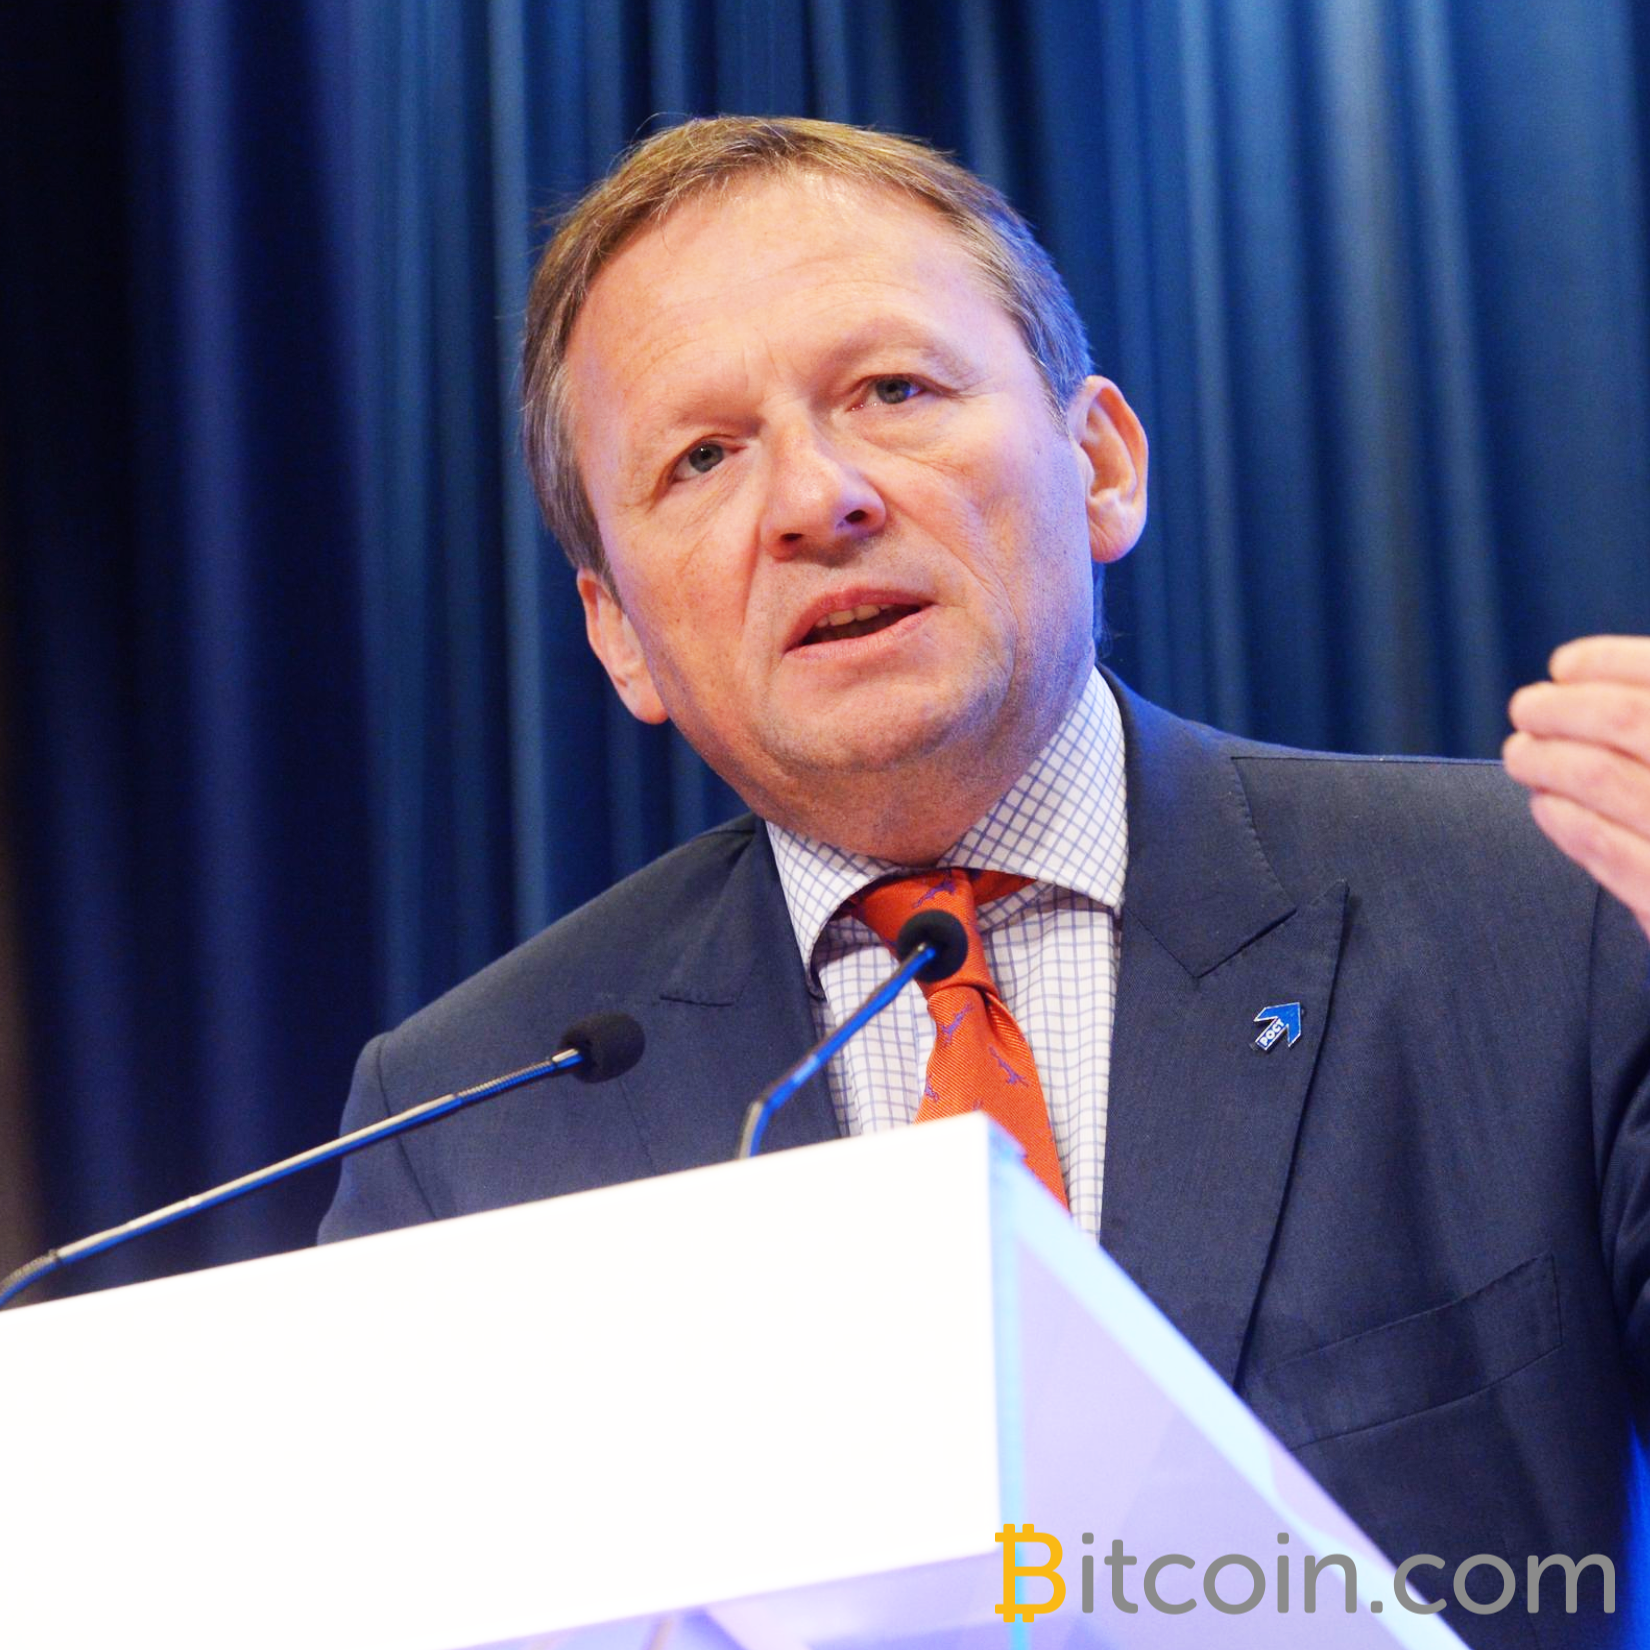 Russian Presidential Candidate: 'We Will Legalize Bitcoin and Other Cryptocurrencies'